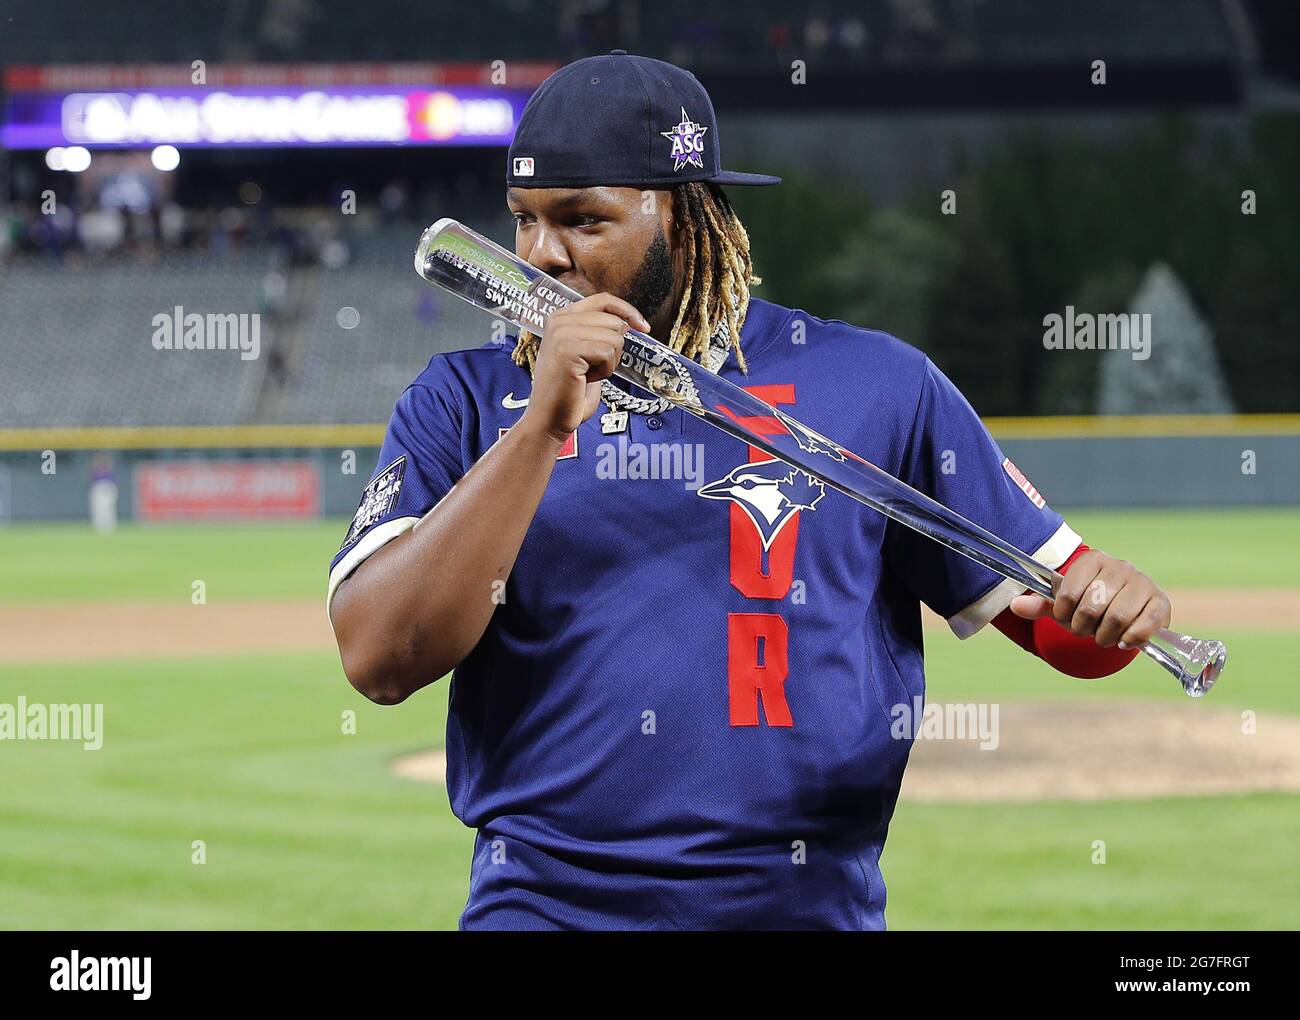 Denver, United States. 13th July, 2021. Toronto Blue Jays first baseman Vladimir Guerrero Jr. kisses his trophy after being named the MVP of the 2021 MLB All-Star Game at Coors Field in Denver, Colorado, on Tuesday, July 13, 2021. Photo by Bob Strong/UPI Credit: UPI/Alamy Live News Stock Photo